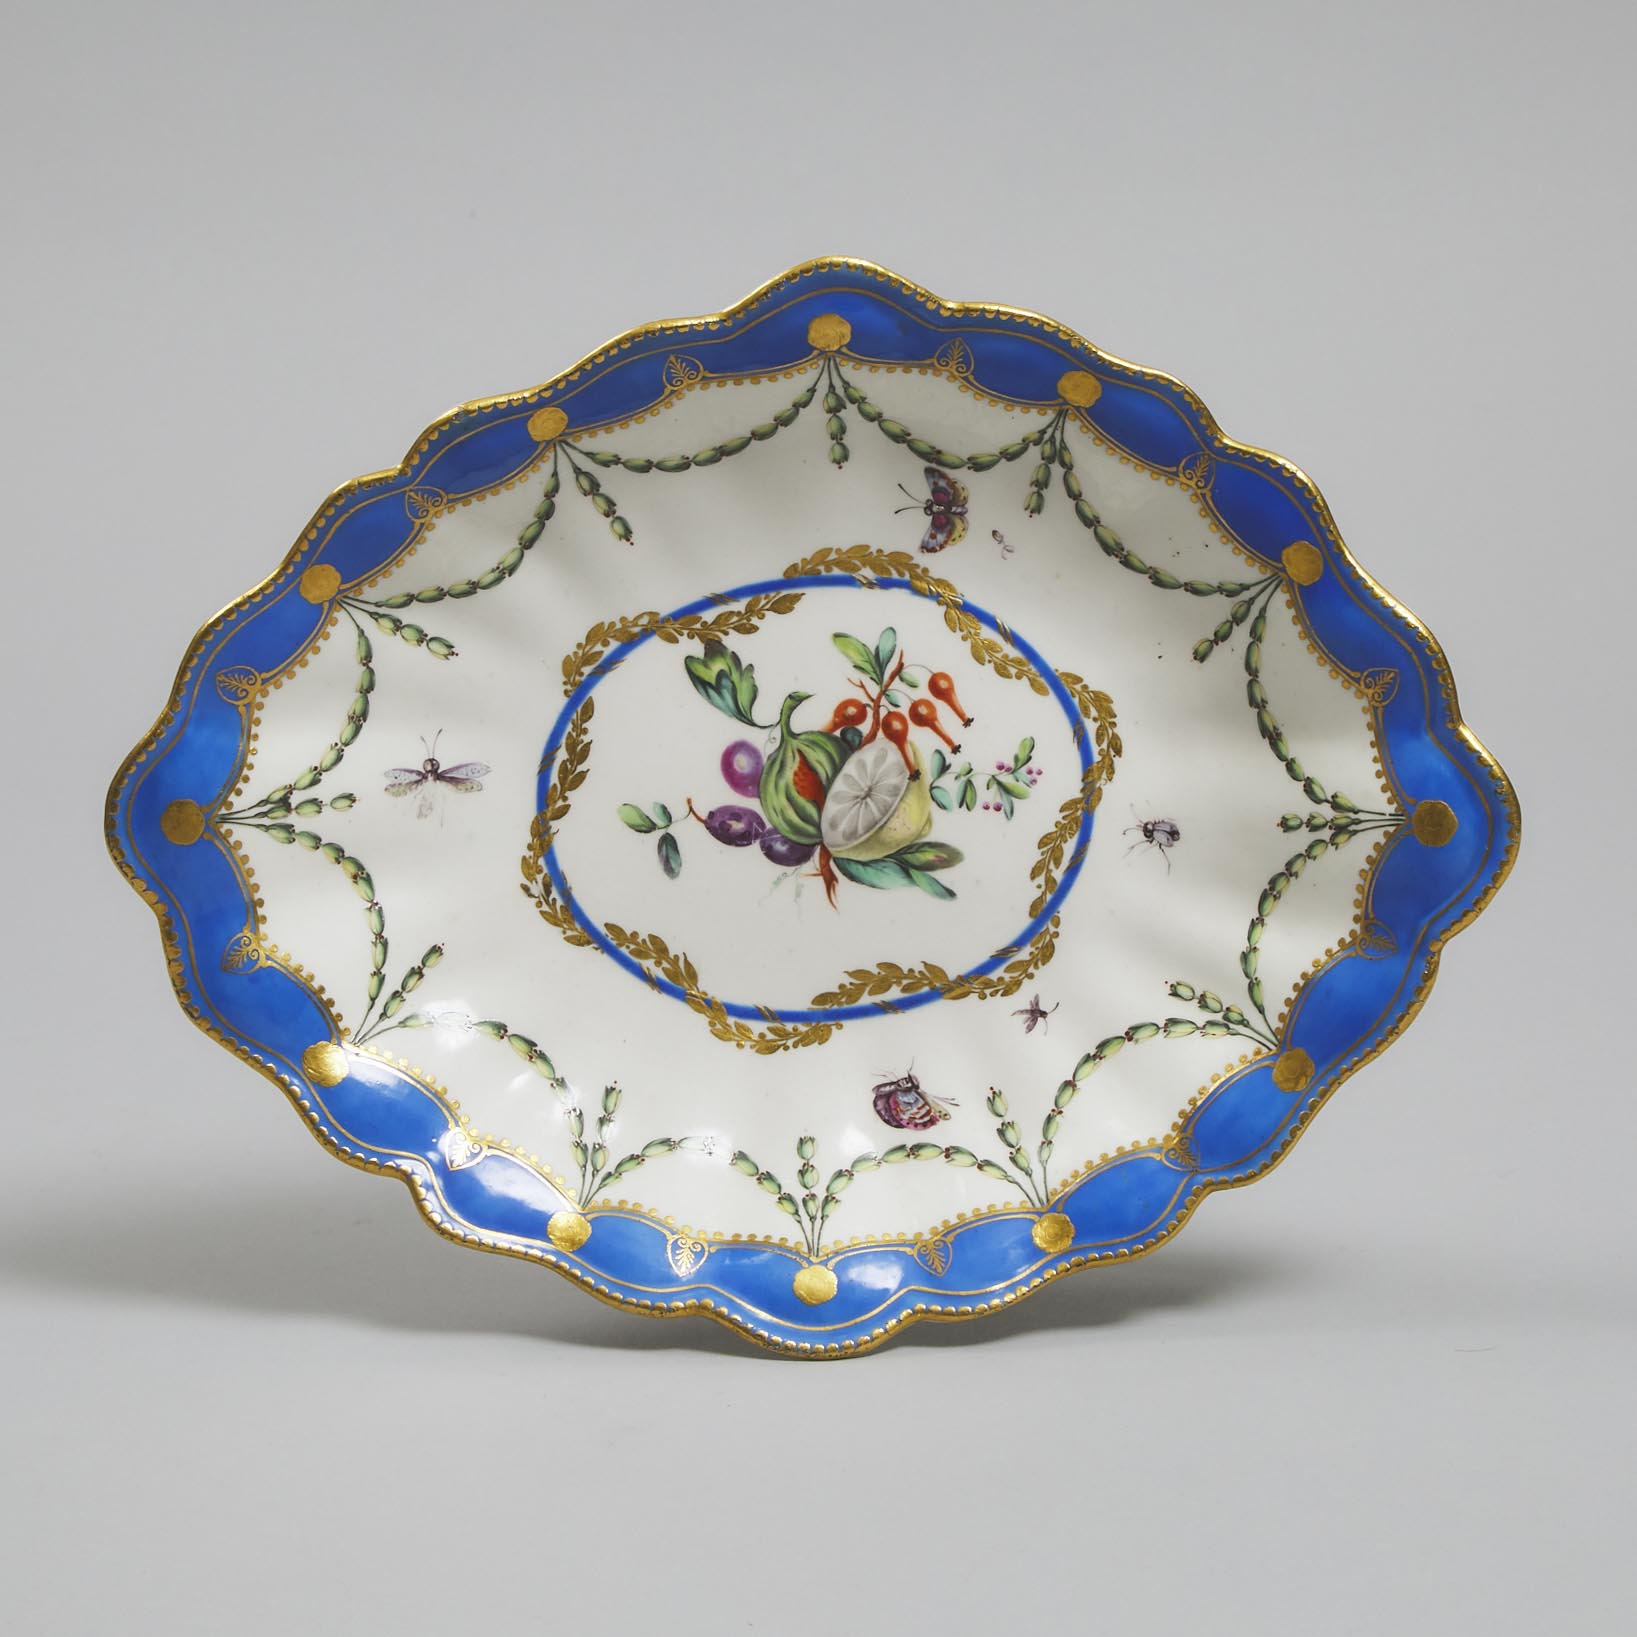 Chelsea-Derby Lobed Oval Dish, c.1775